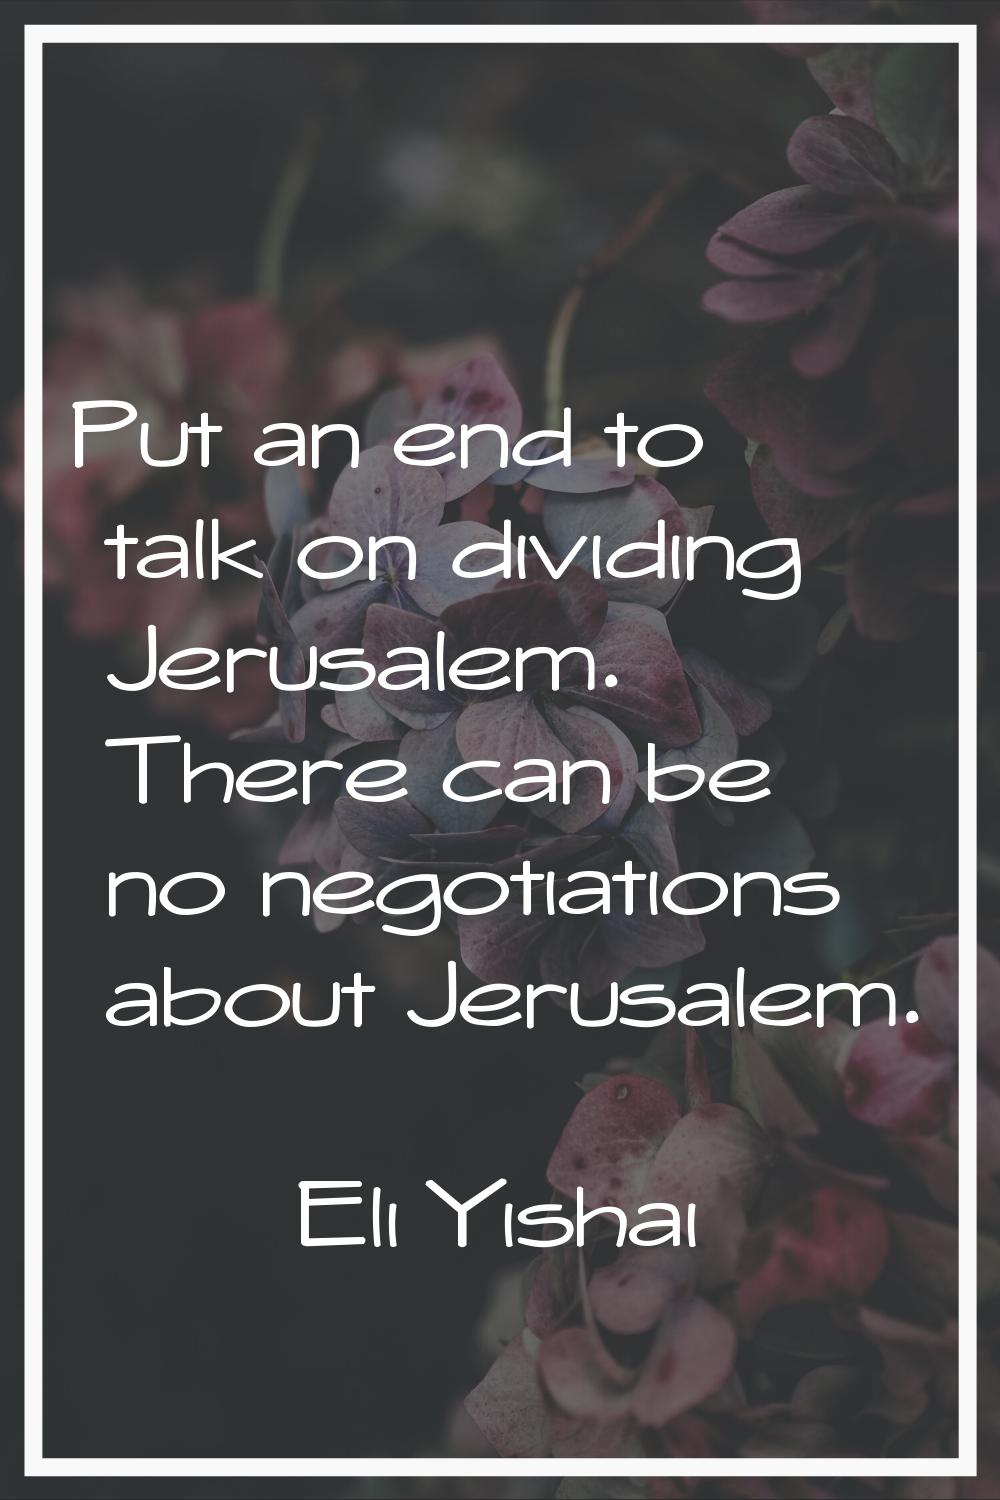 Put an end to talk on dividing Jerusalem. There can be no negotiations about Jerusalem.